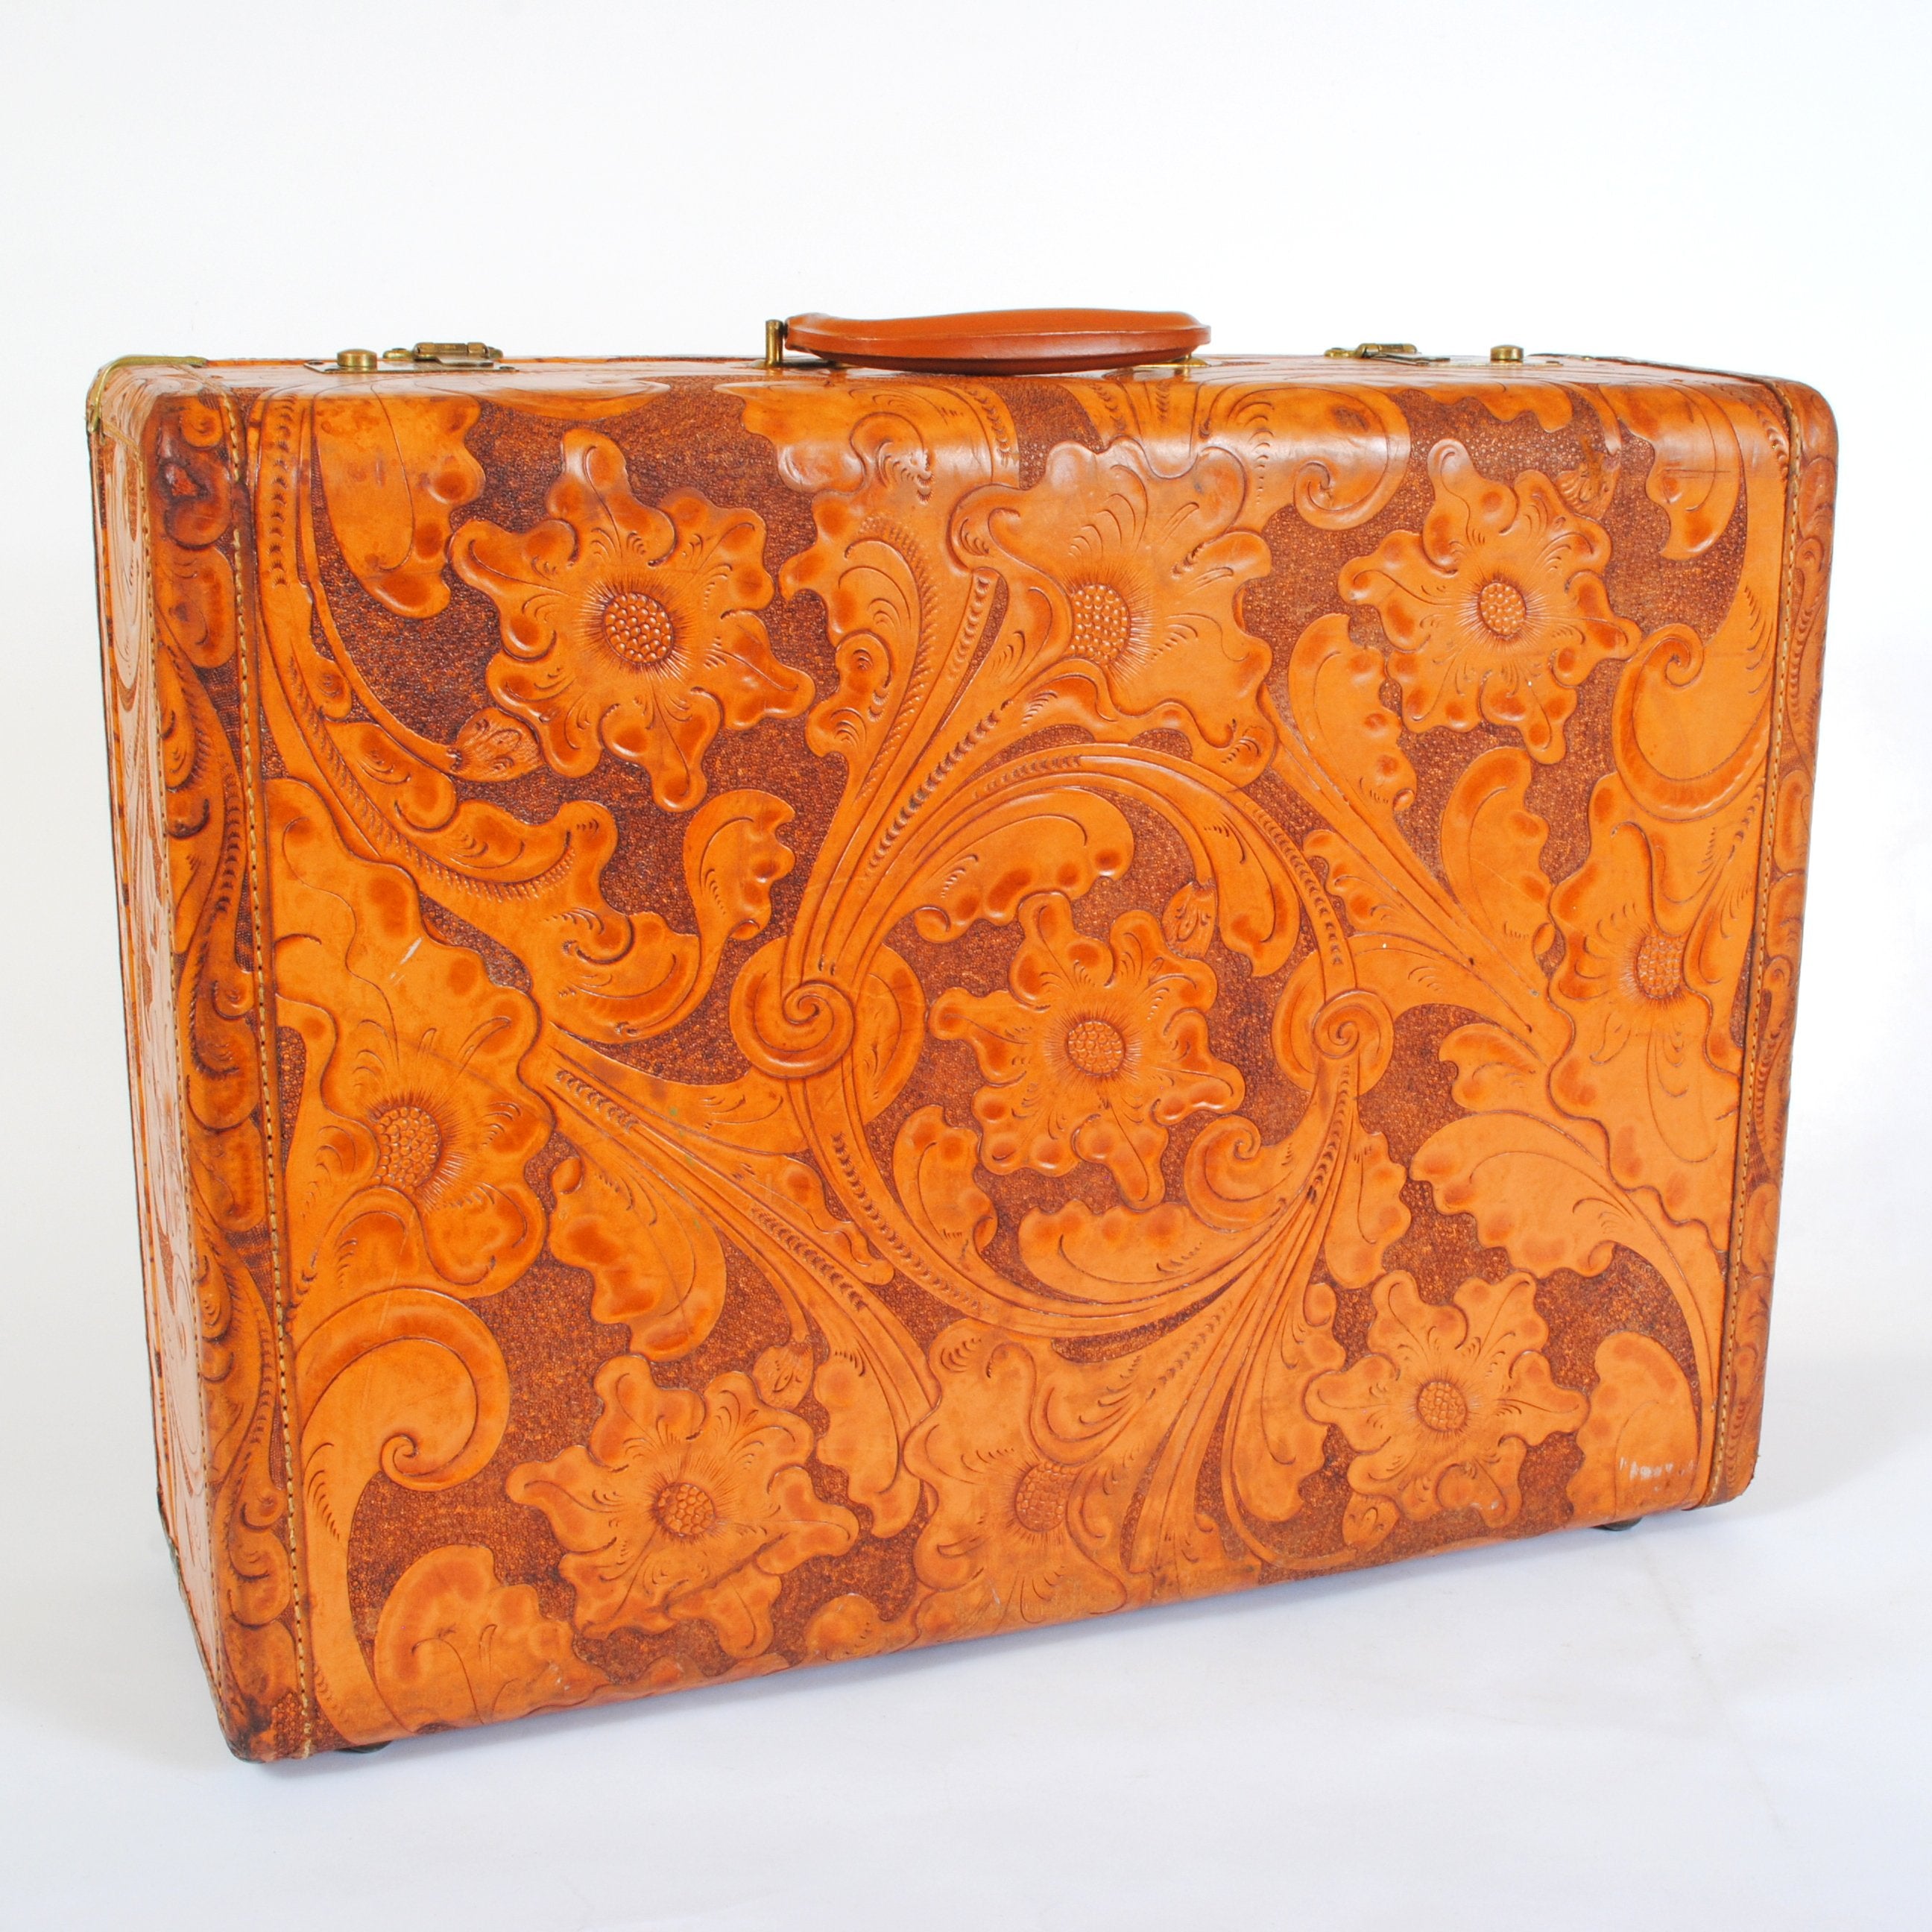 in Stock Vintage Style Leather Handmade Retro Vintage Suitcase